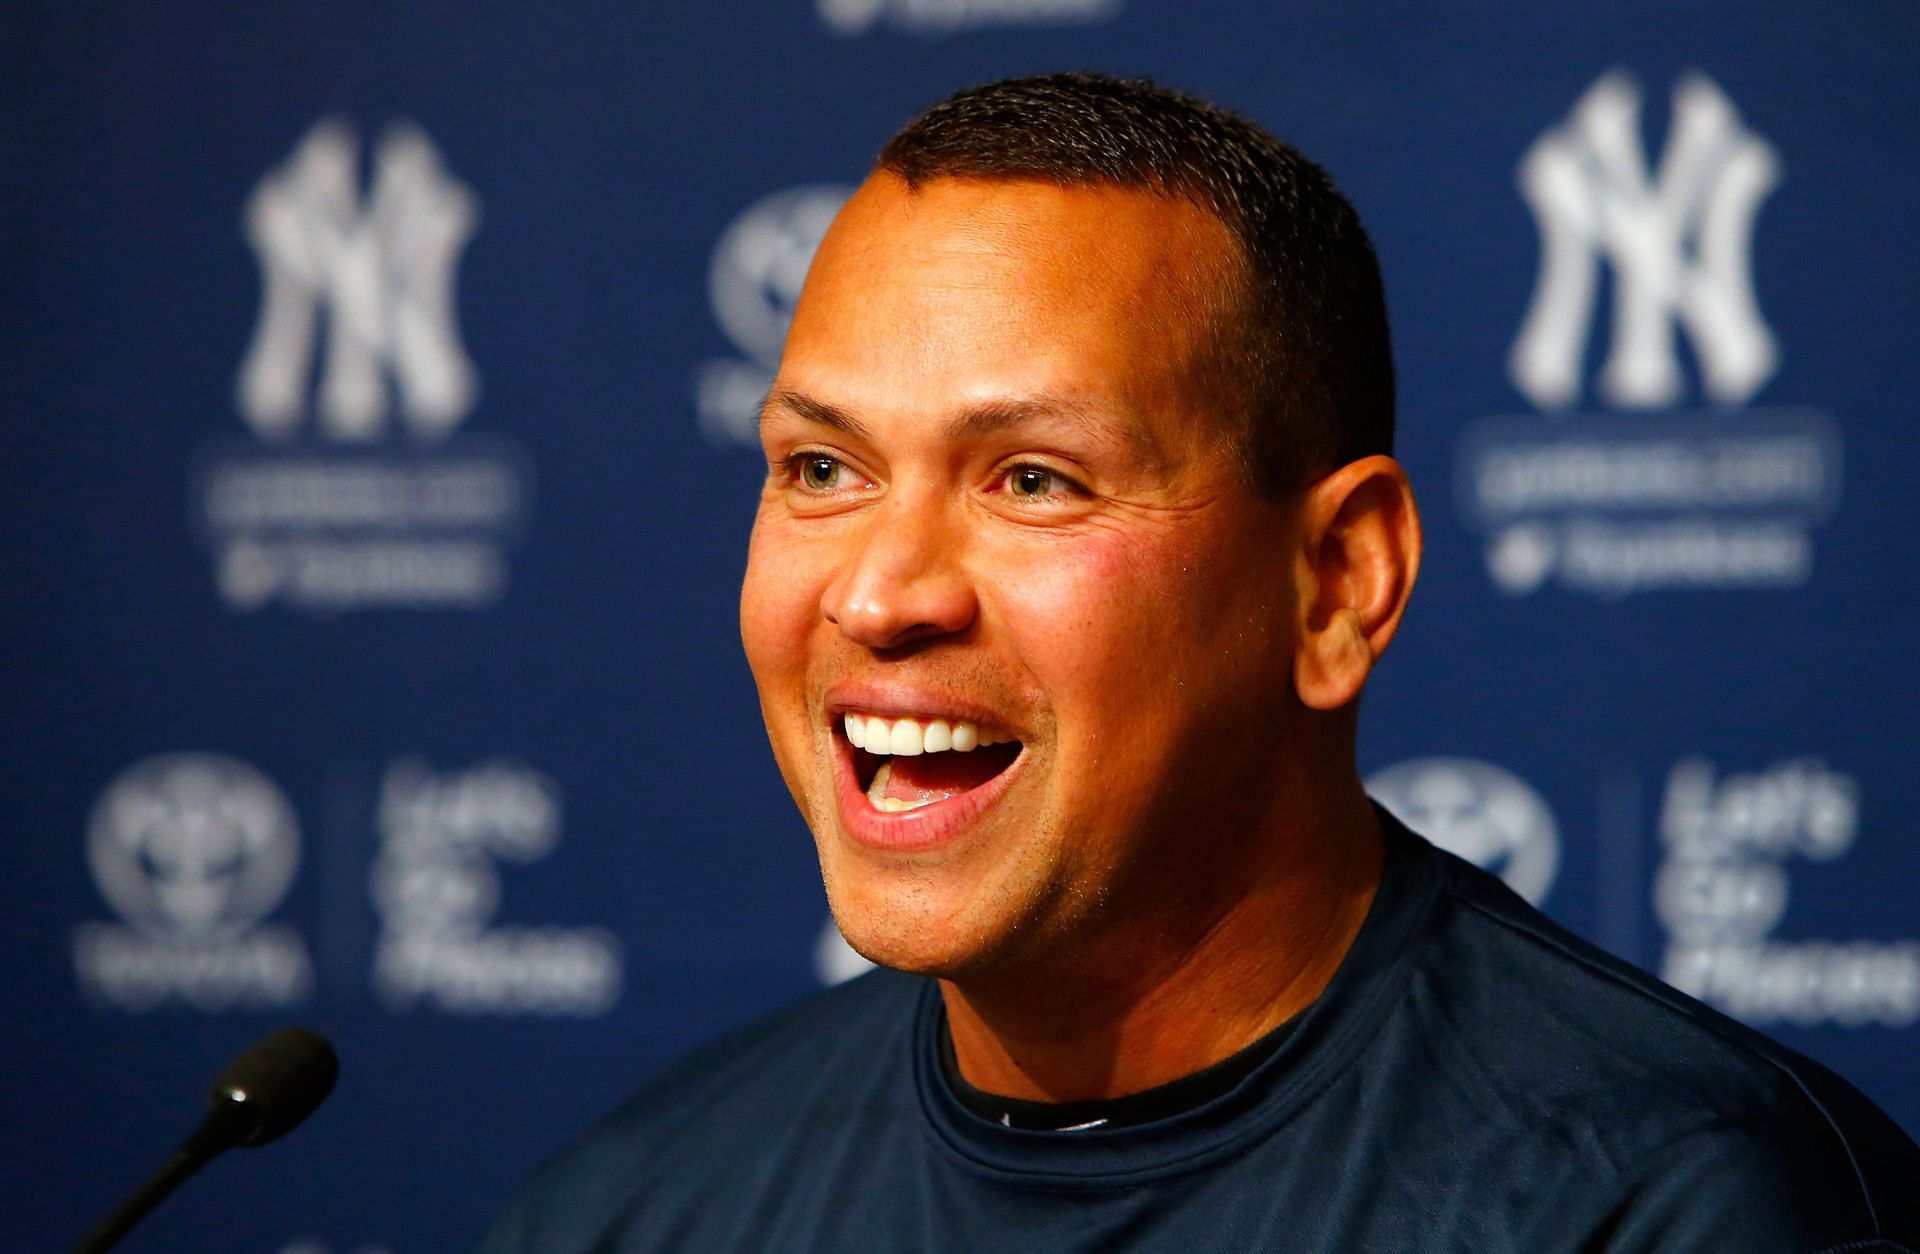 Jose Canseco blasts former New York Yankees star Alex Rodriguez, says he cheated on Jennifer Lopez